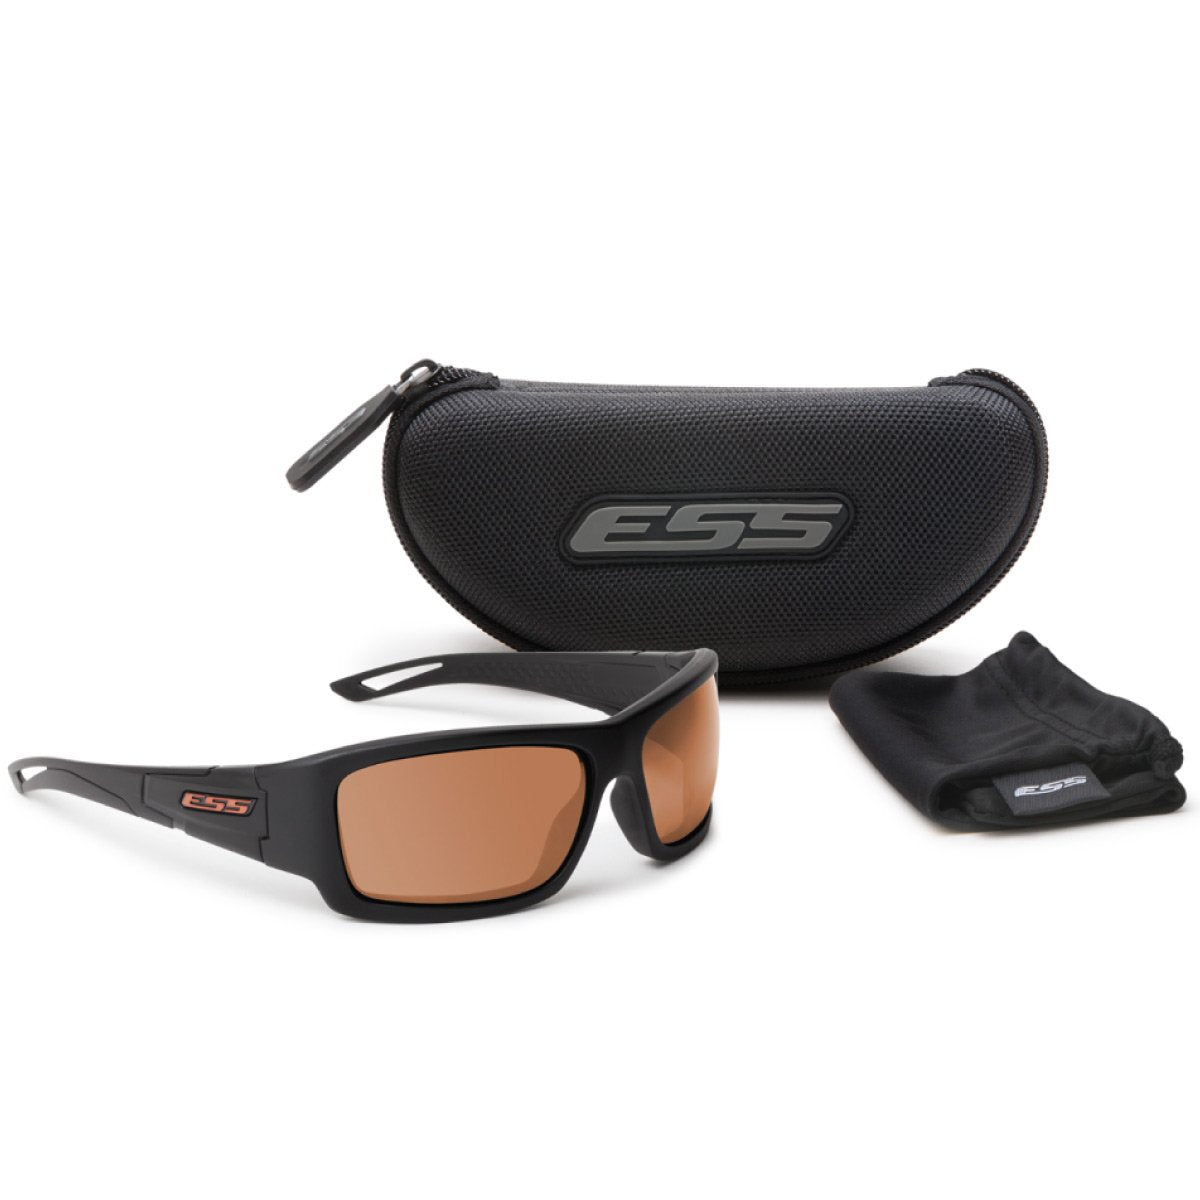 ESS Credence Sunglasses Black Frame Mirrored Copper Lens Eyewear Eye Safety Systems Tactical Gear Supplier Tactical Distributors Australia